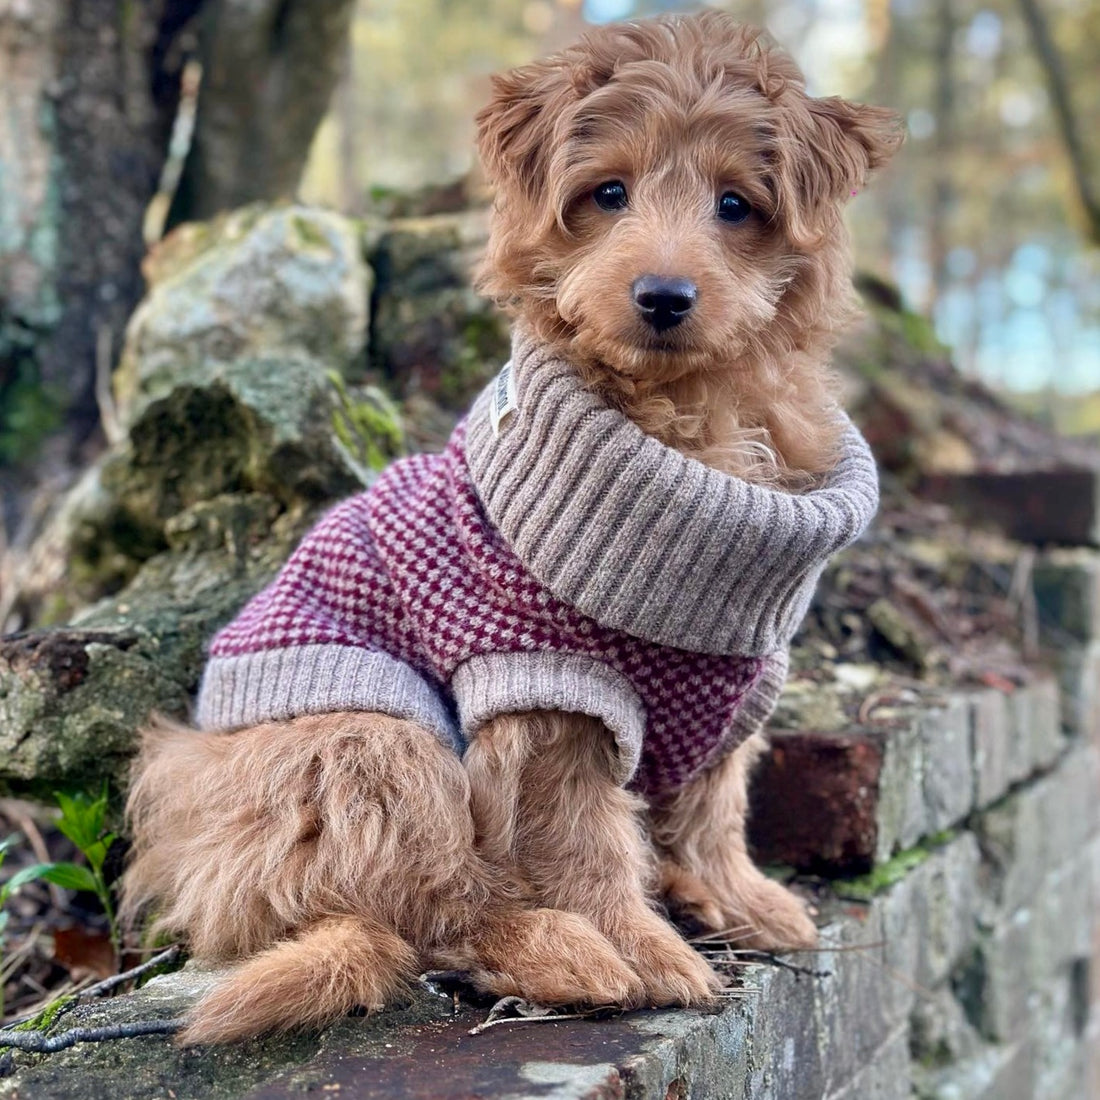 Cockerpoo puppy in a knitted jumper